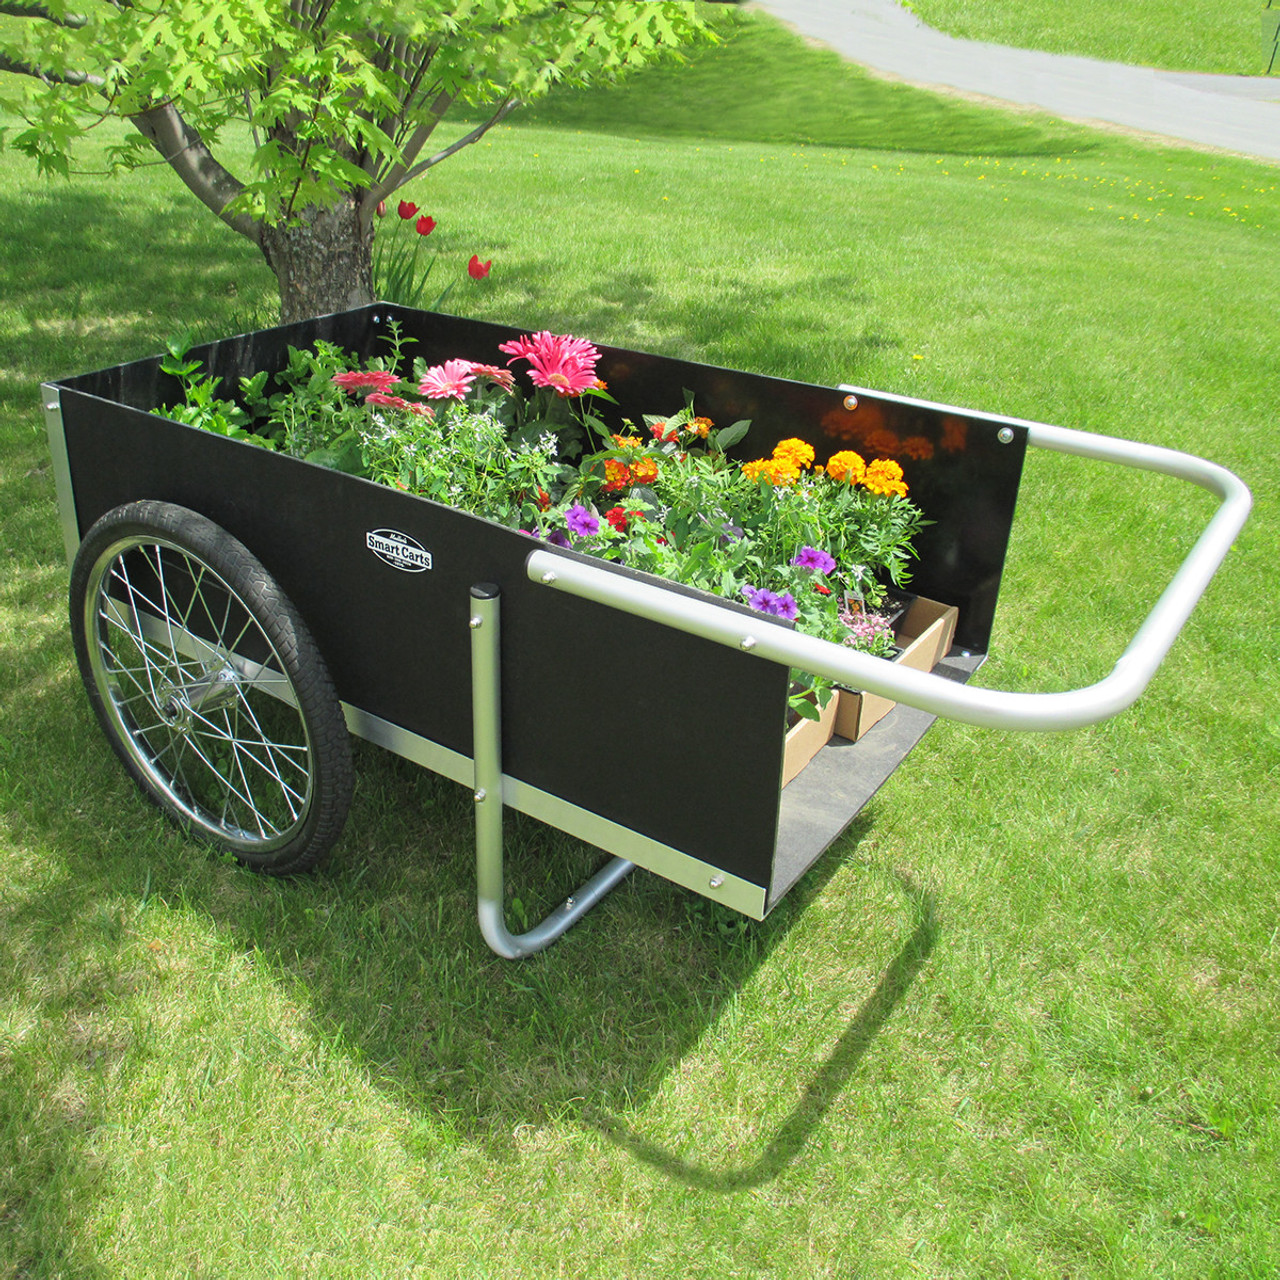 The 7 Best Garden Carts: Choosing the Right One - Epic Gardening